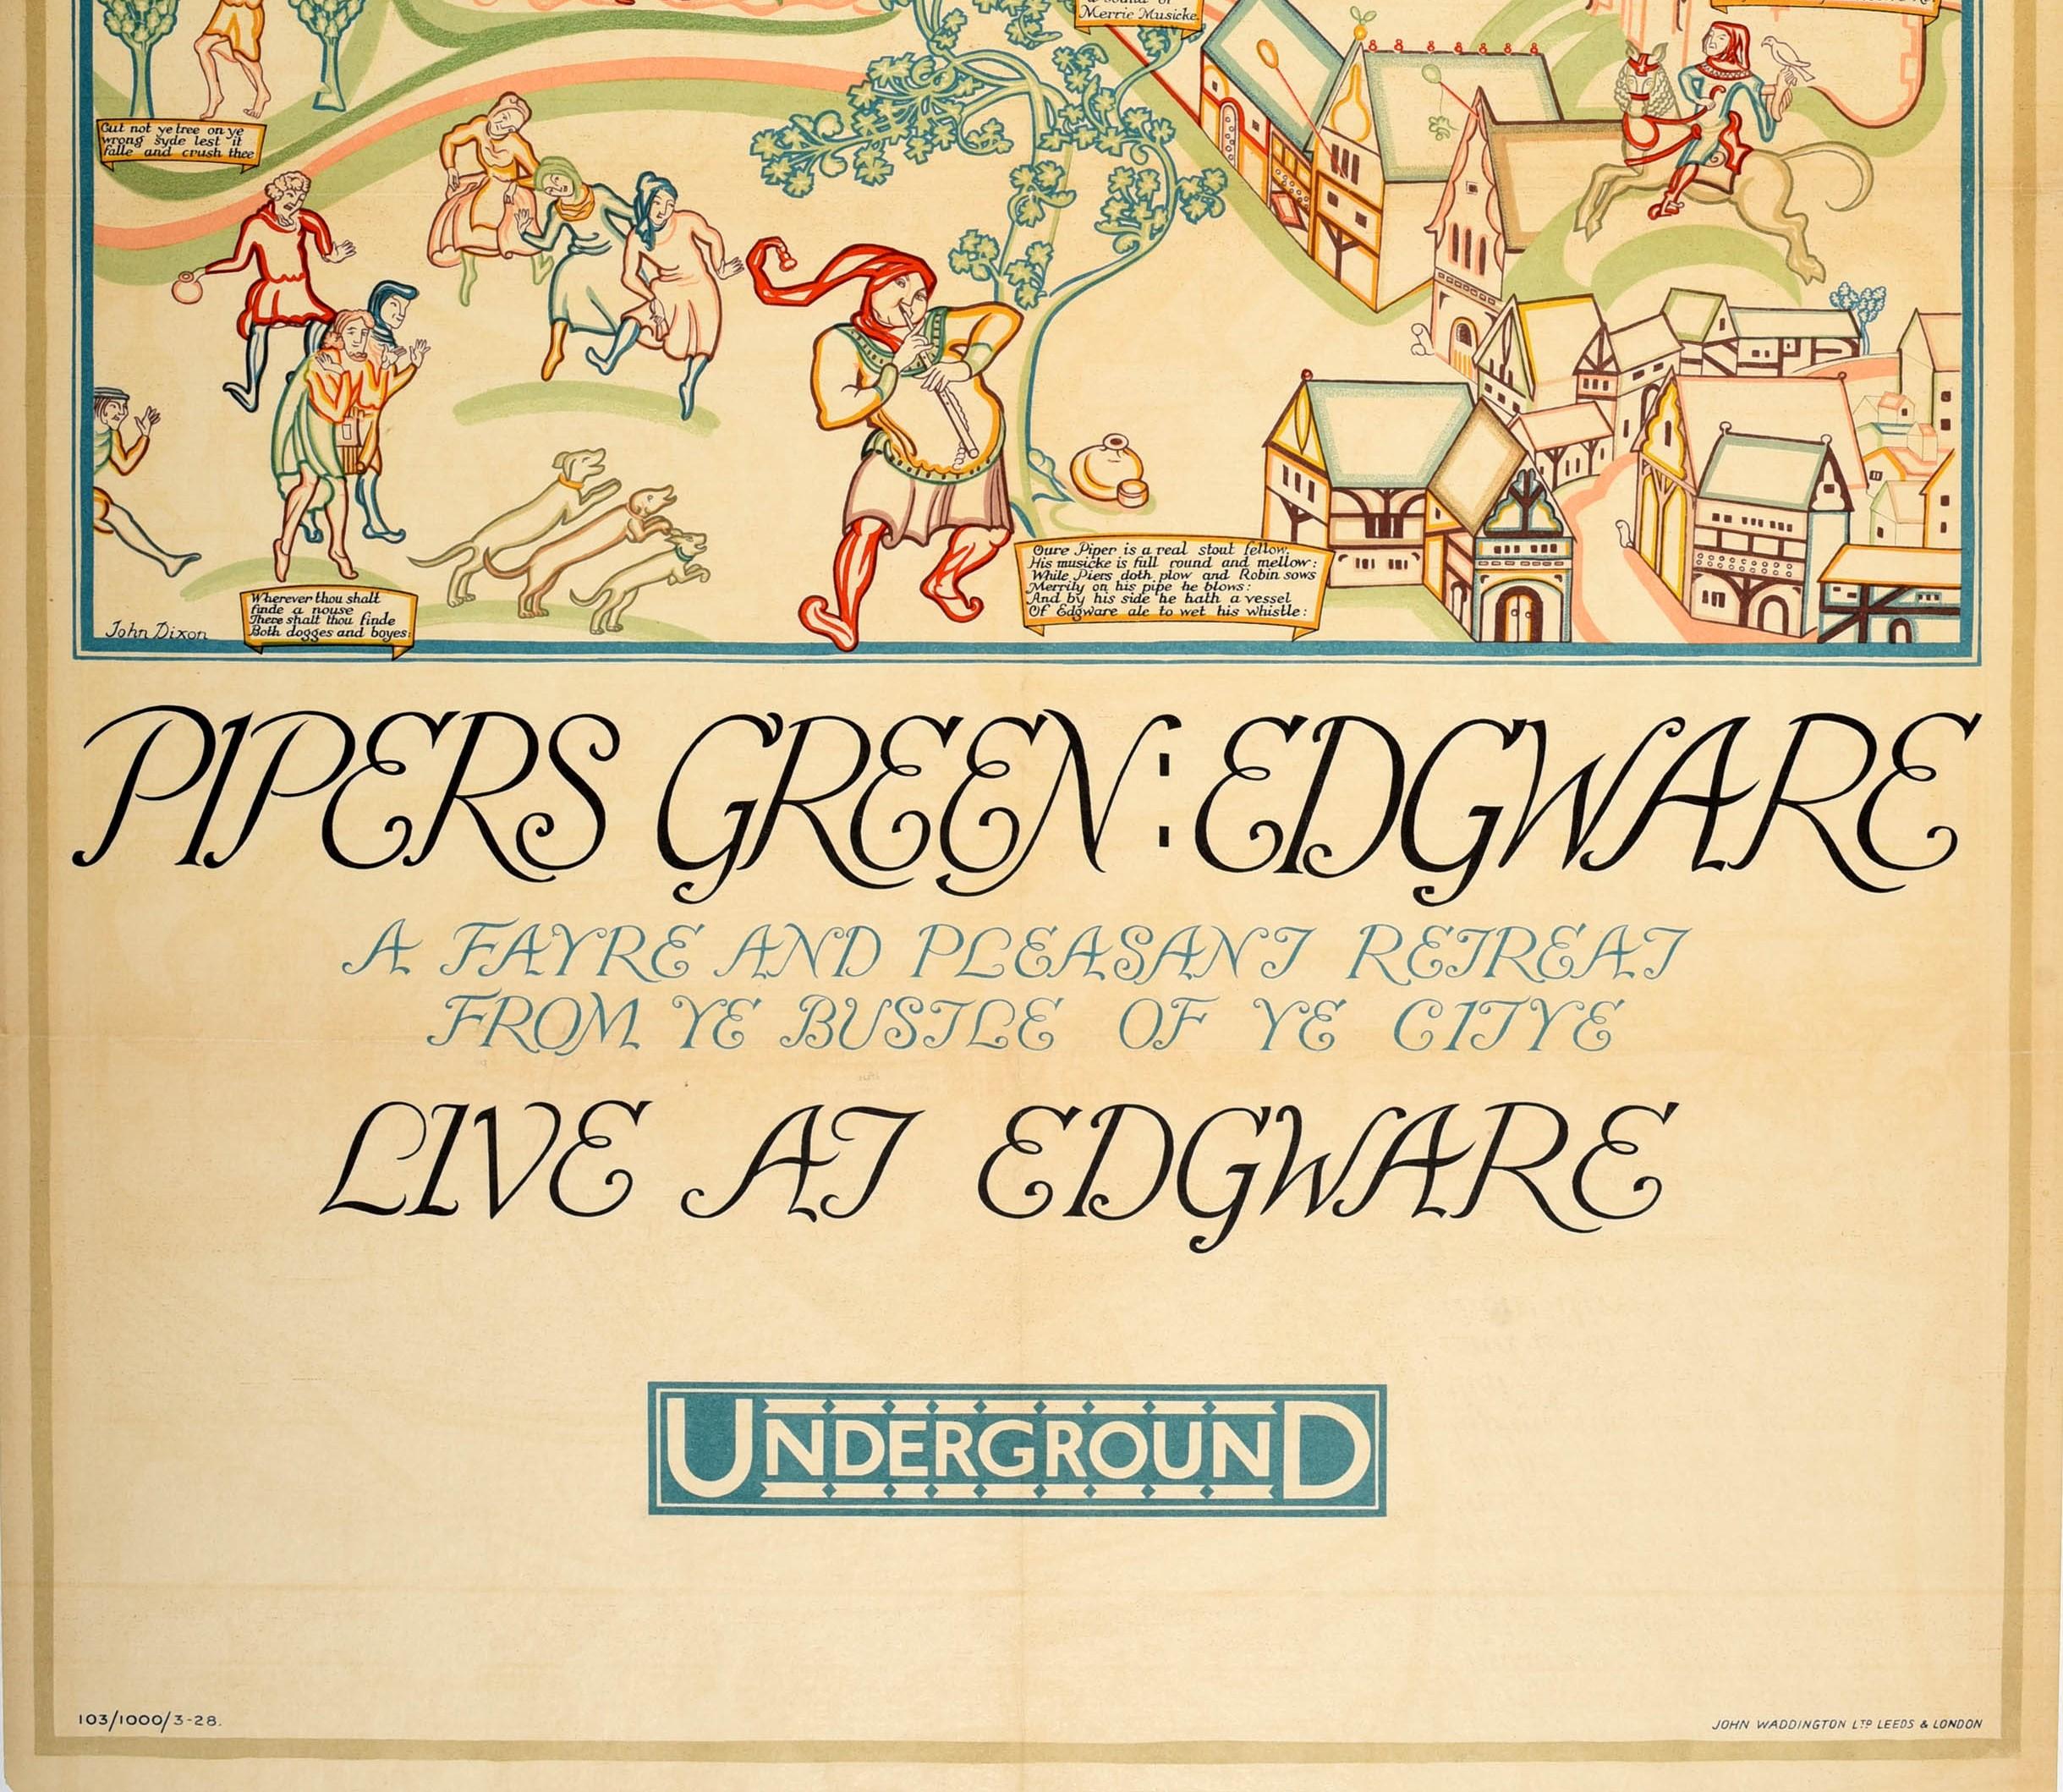 British Original Vintage London Underground Poster Pipers Green Edgware Travel By Tube For Sale